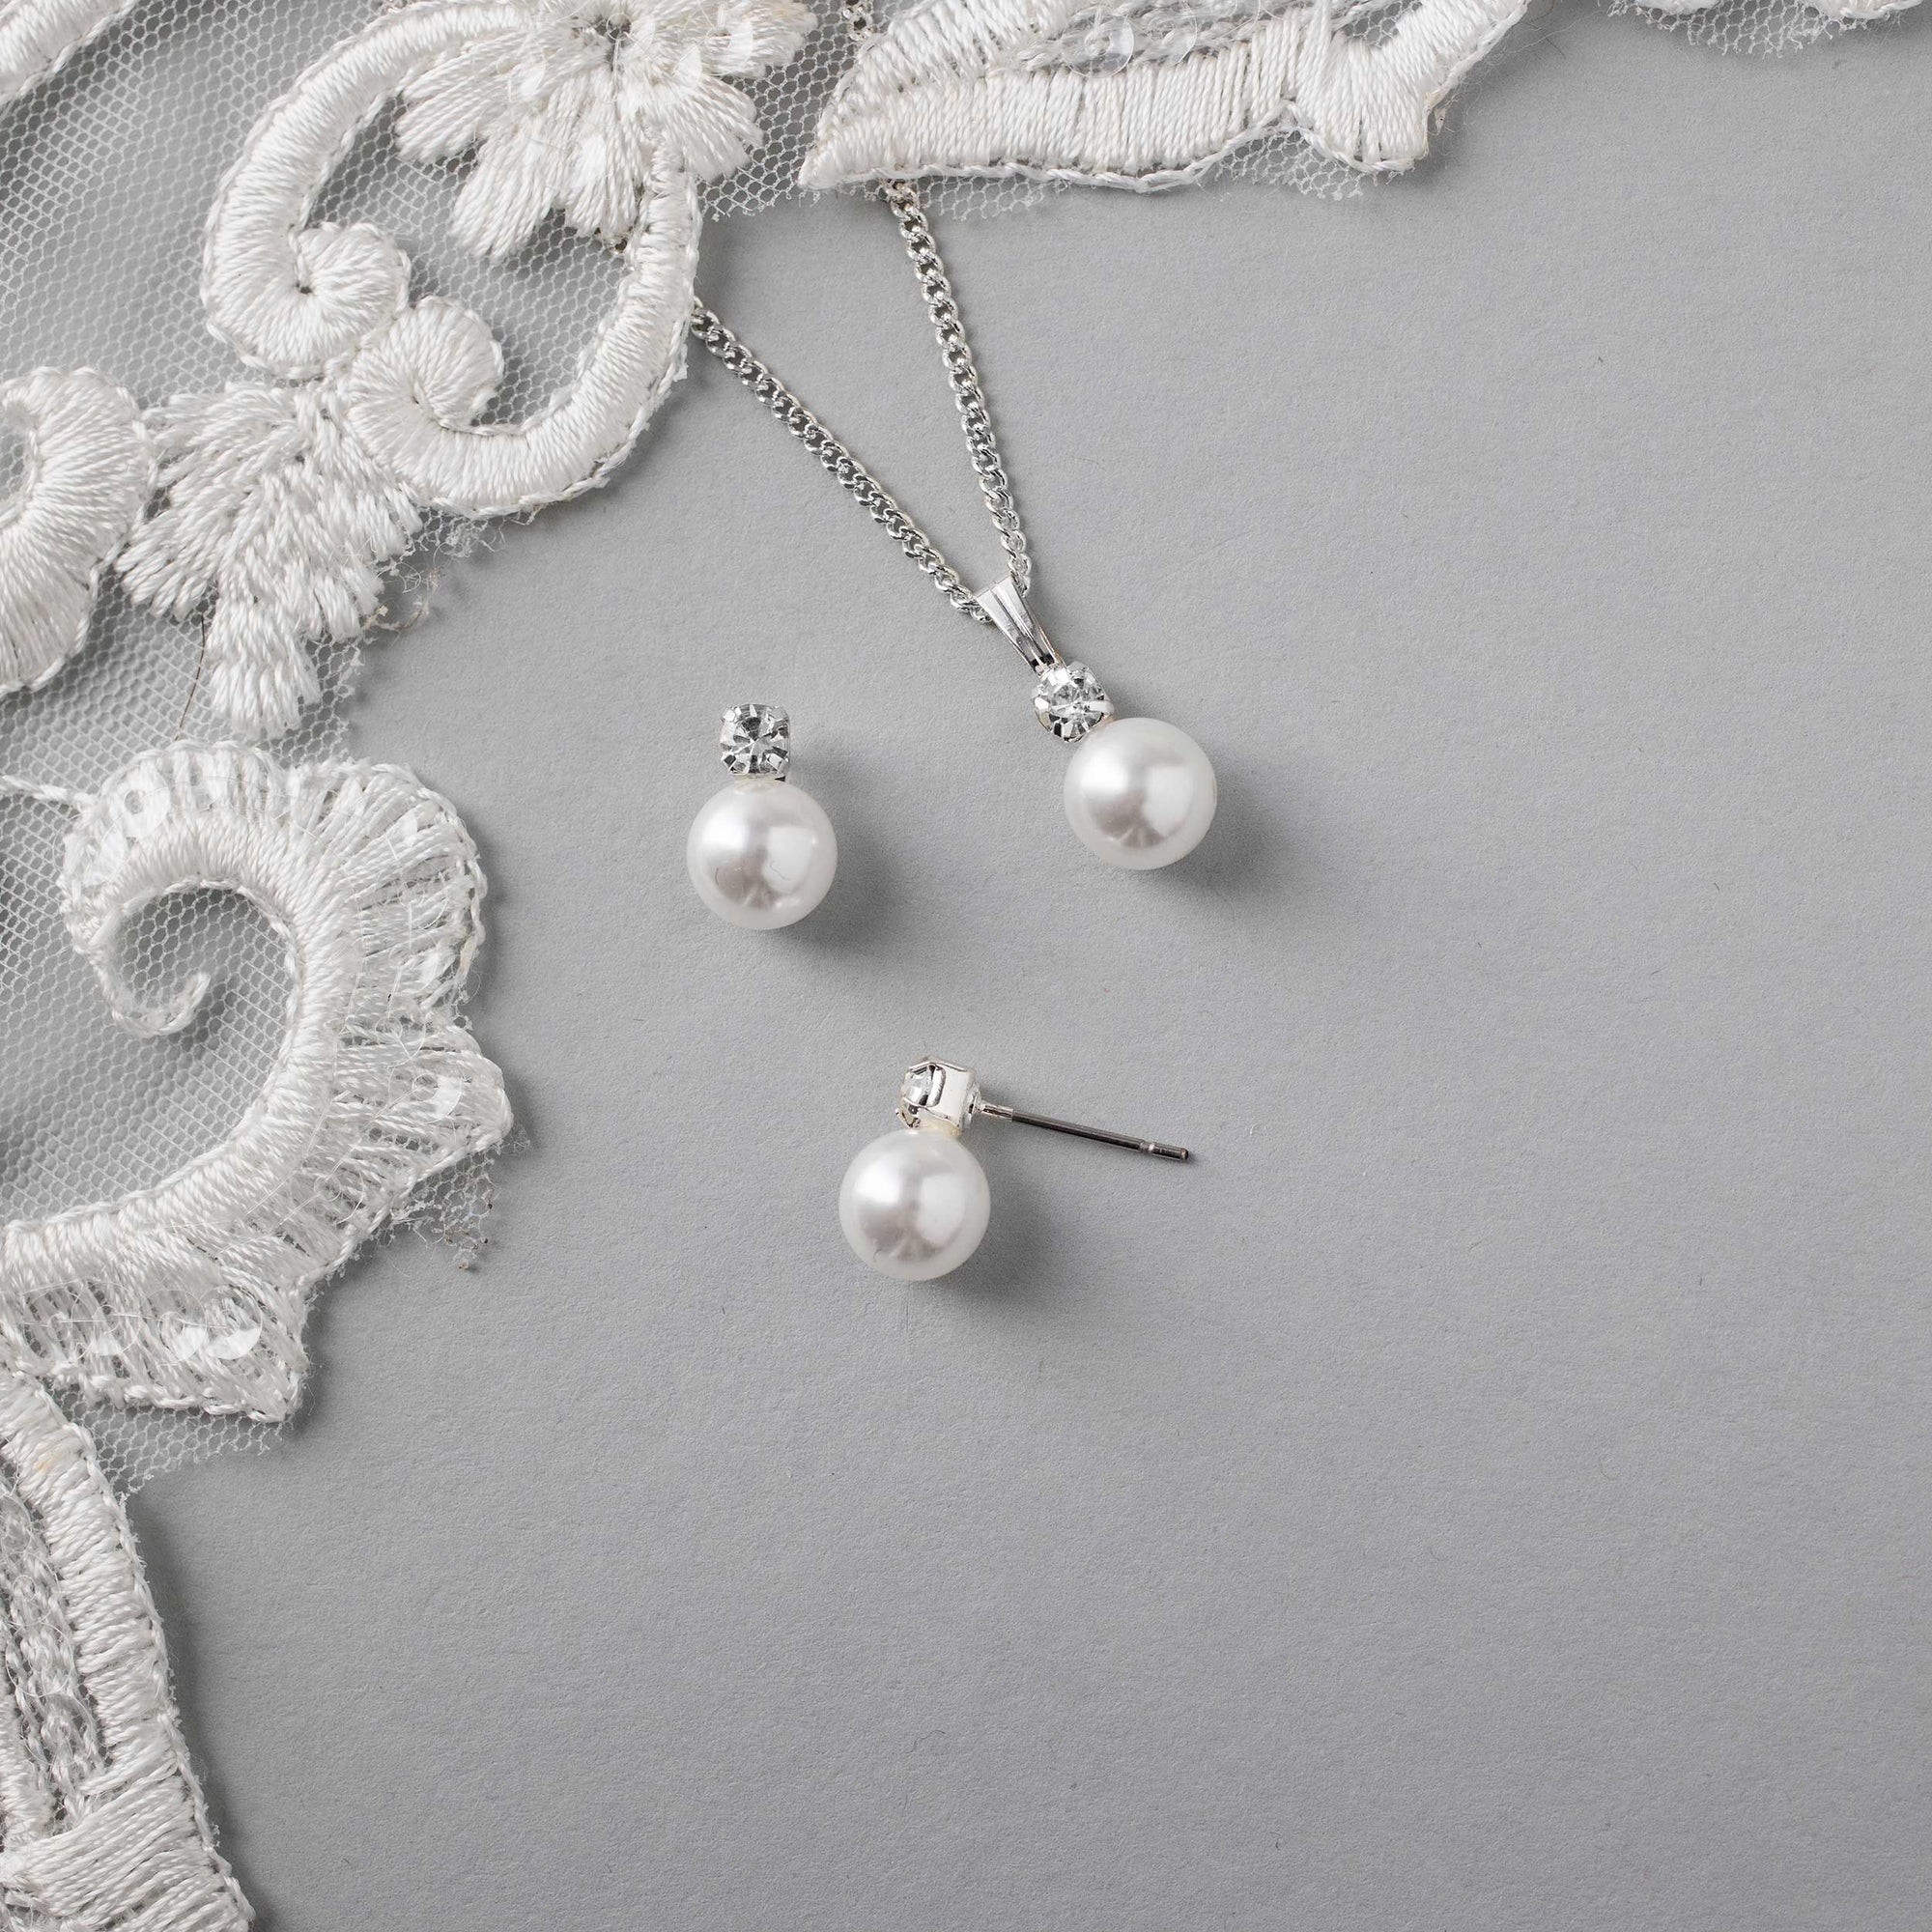 Classic White Pearl Necklace and Earrings